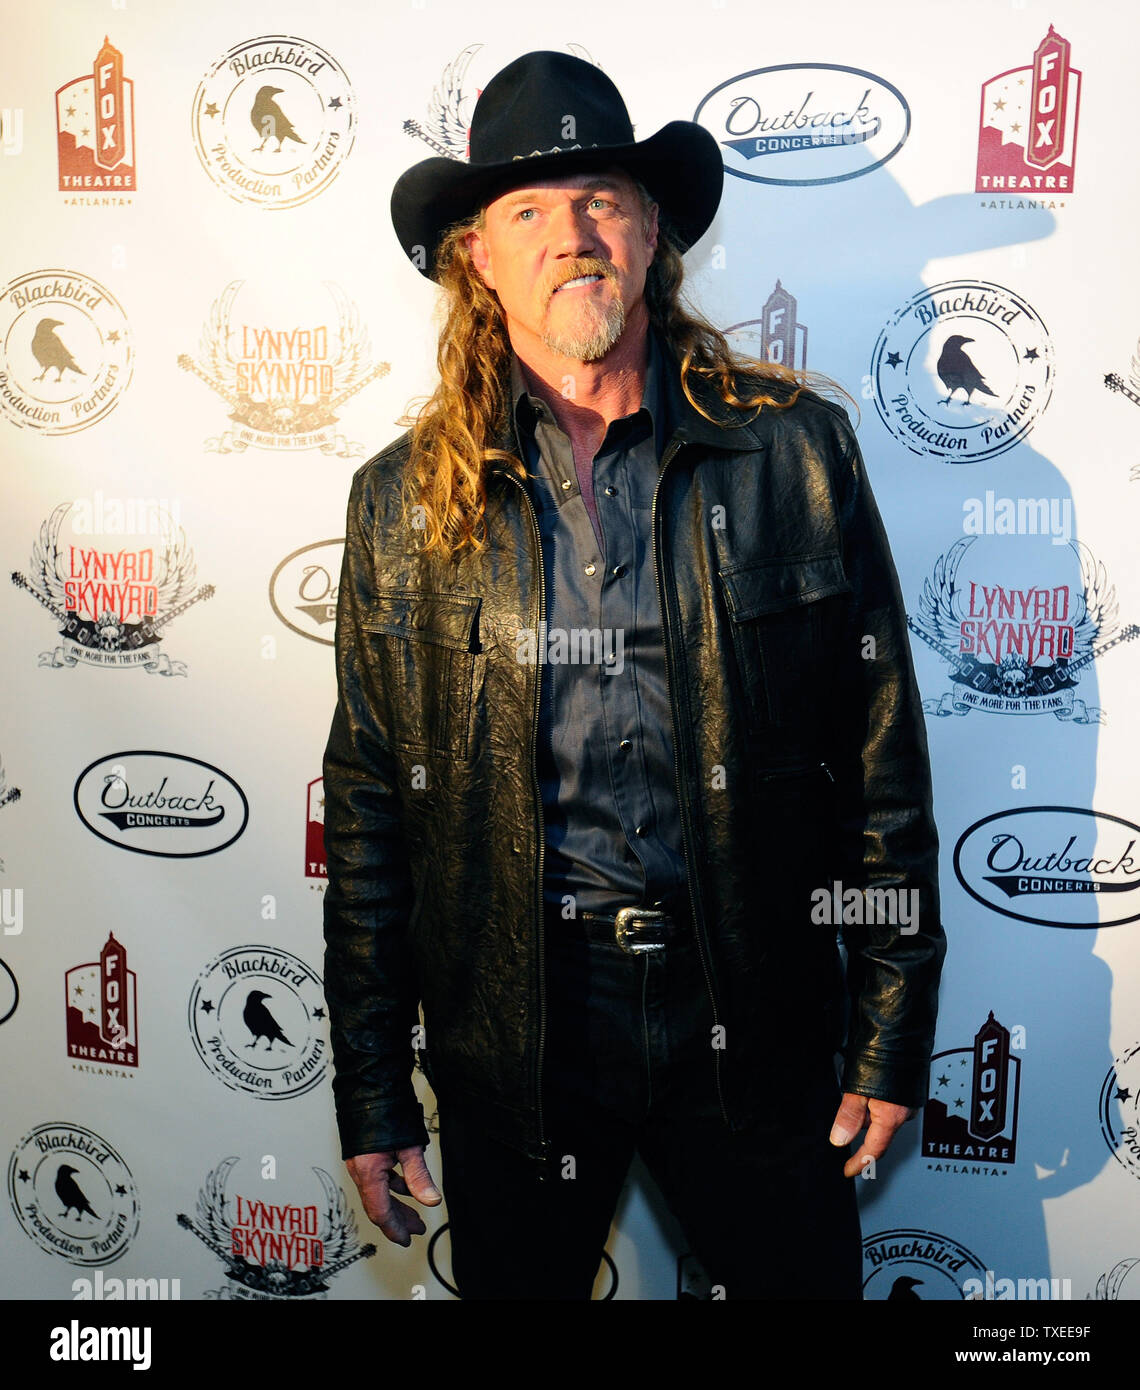 Country music artist Trace Adkins arrives backstage for ÒOne More For The Fans! - Celebrating The Songs & Music of Lynyrd Skynyrd,' a special concert featuring once-in-a-lifetime collaborations by friends and admirers paying tribute to Lynyrd SkynyrdÕs four decades of southern-based rock music at the Fox Theatre in Atlanta on November 12, 2014. UPI/David Tulis Stock Photo